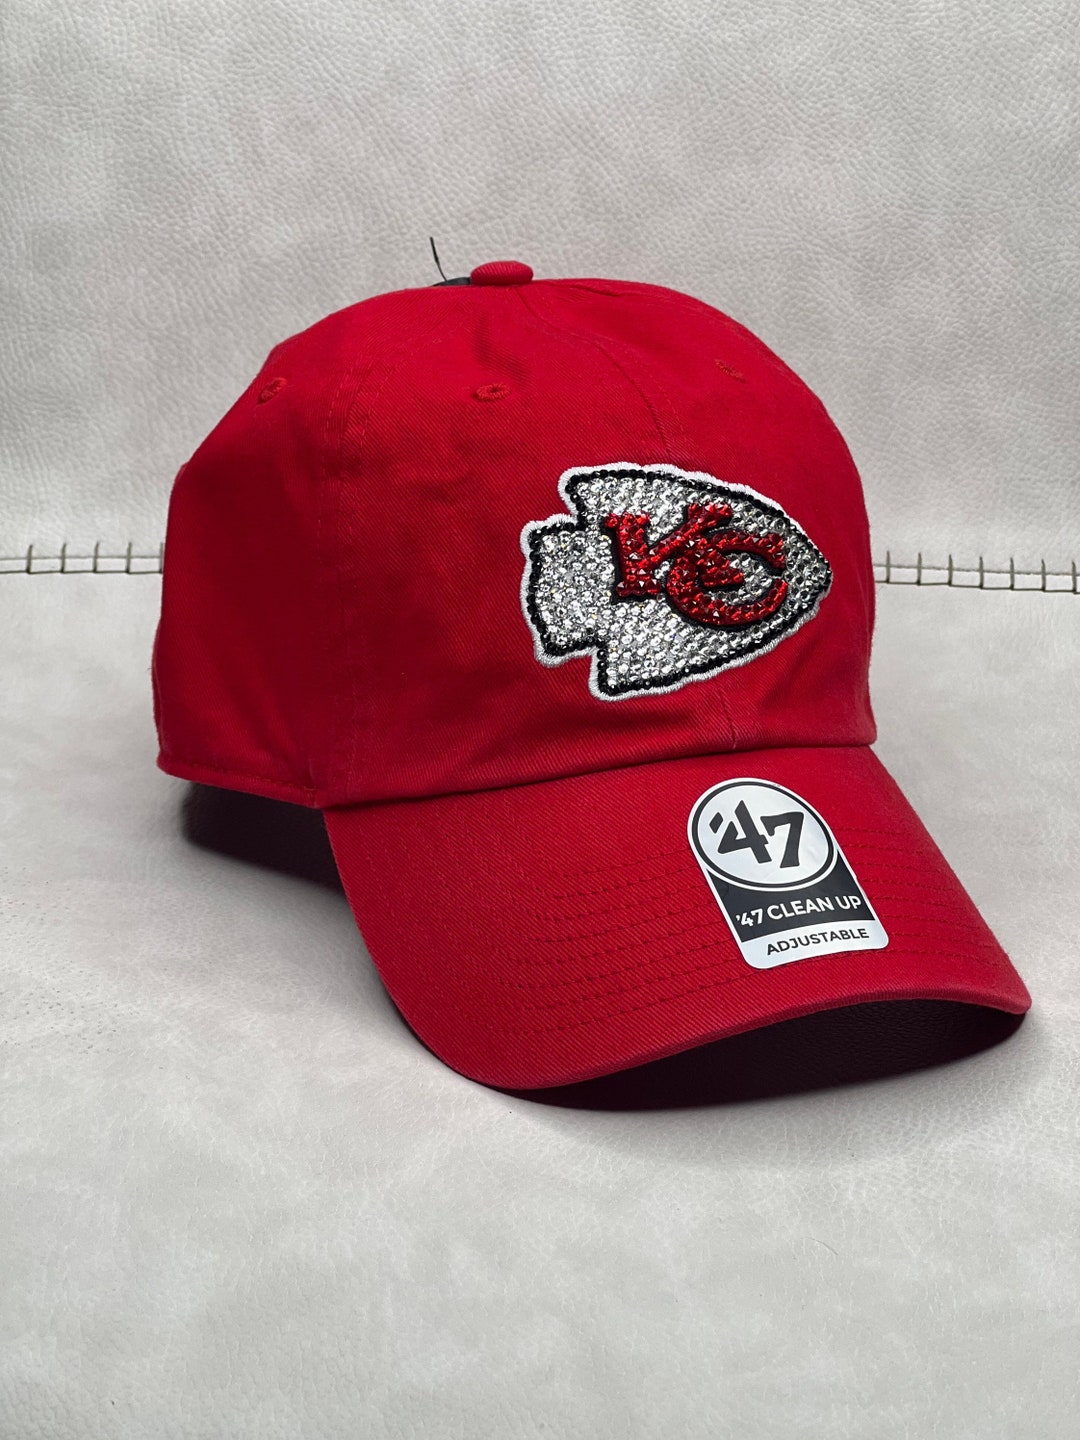 Red Kansas City Chiefs Bling Hat SHIPS SAME DAY - Etsy